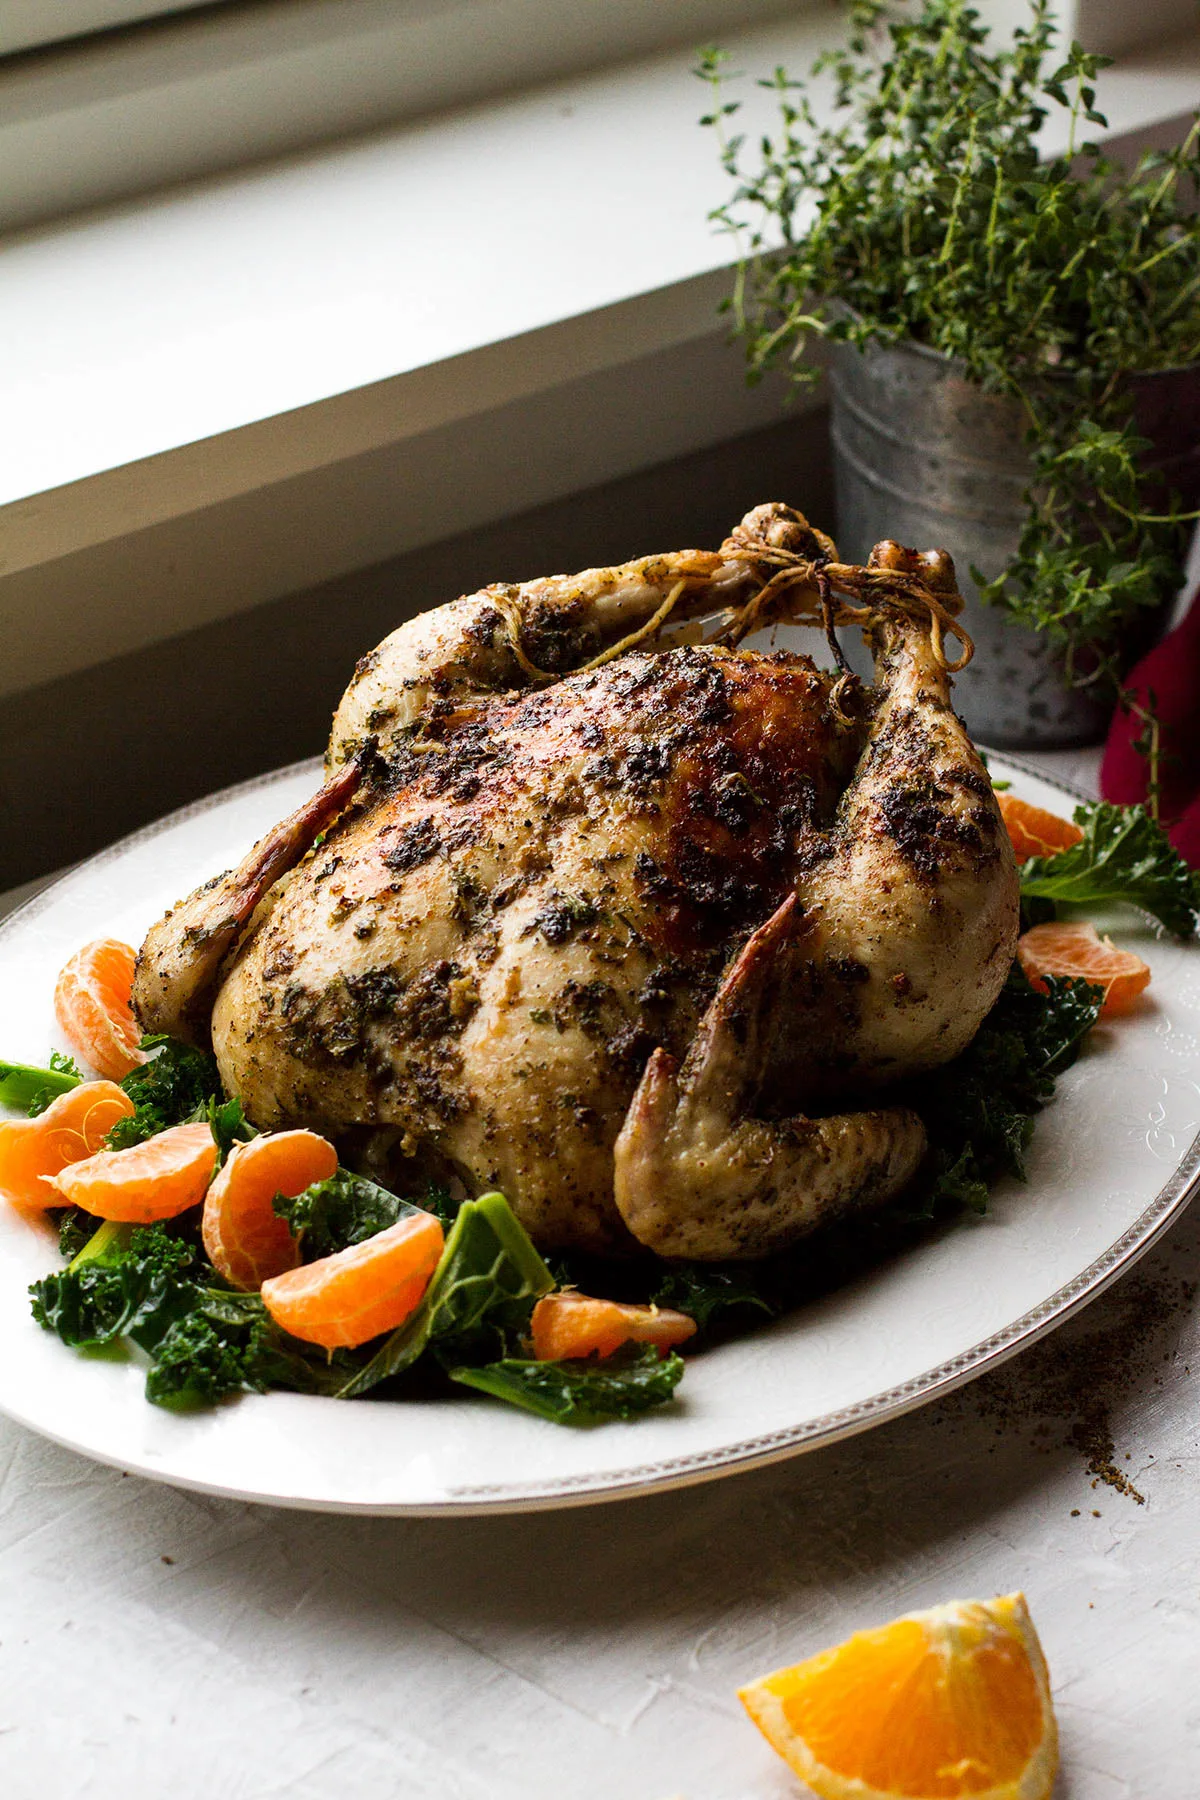 Whole roasted chicken on a bed of kale and clementines, backlighting.